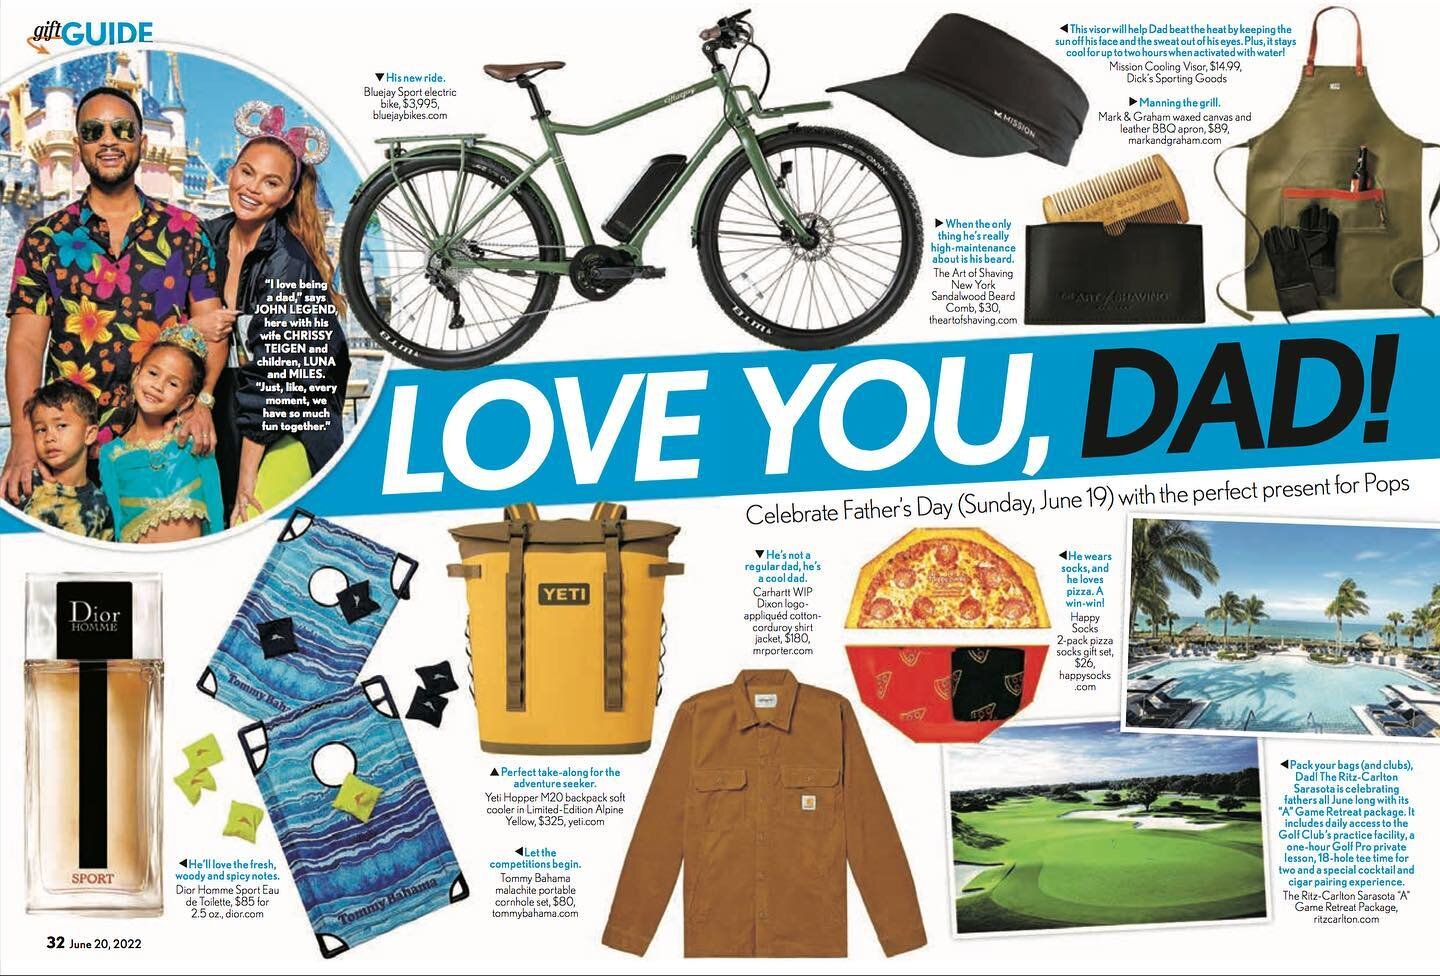 Be the SUPER dad you&rsquo;ve always wanted to be&hellip;and take the kids out on your turbo NEW @bluejaybikes SPORT. A Father&rsquo;s Day Dream Gift in @lifeandstyleweekly 🚴 @hkuday